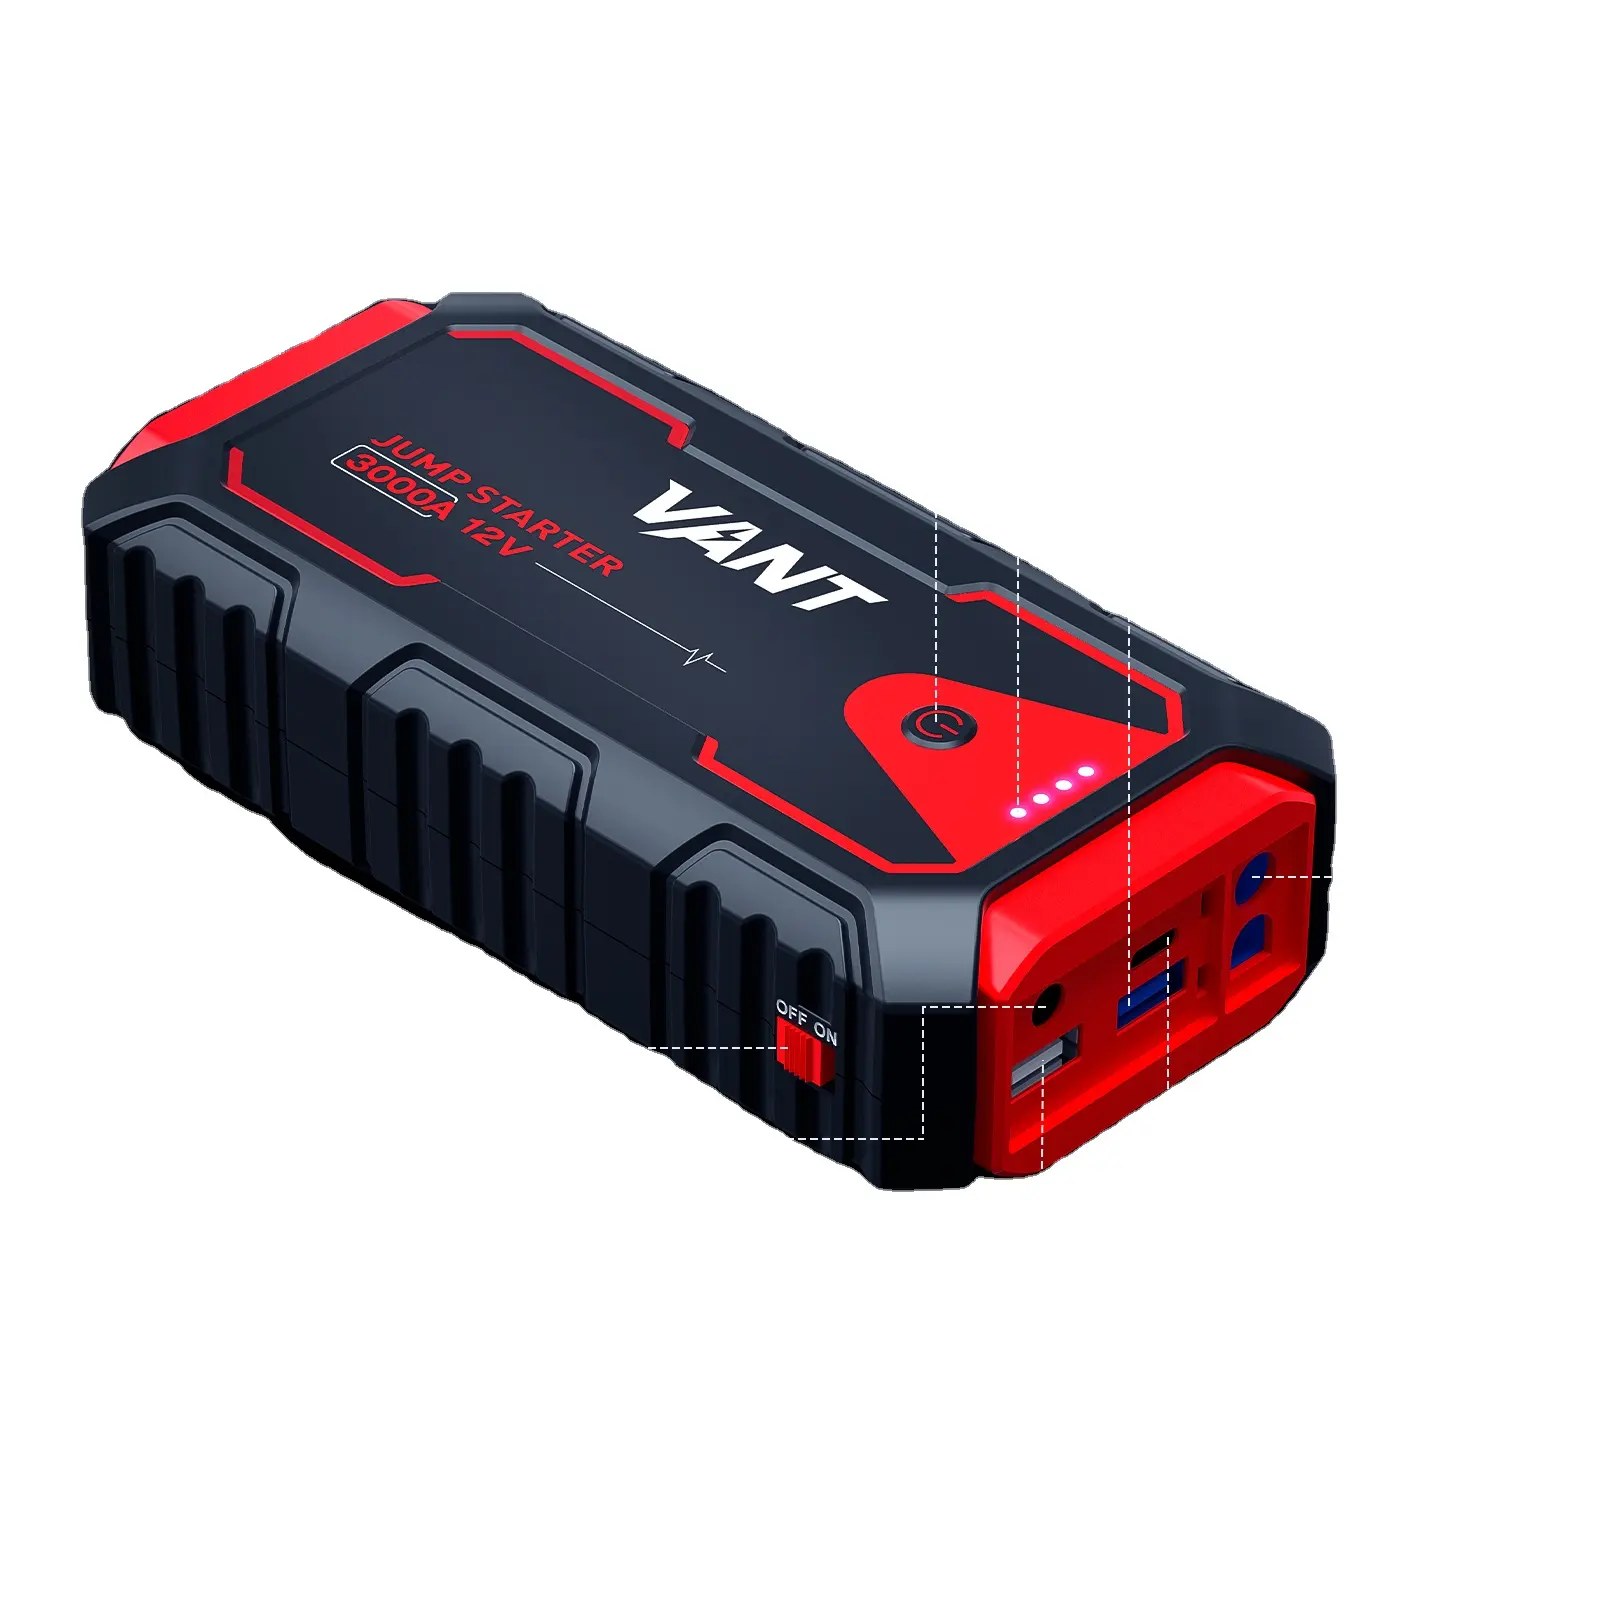 Hot Sale Auto Accu Jump Starter Pack 3000a 12V Draagbare Auto Acculader Jump Starter Met Led Licht